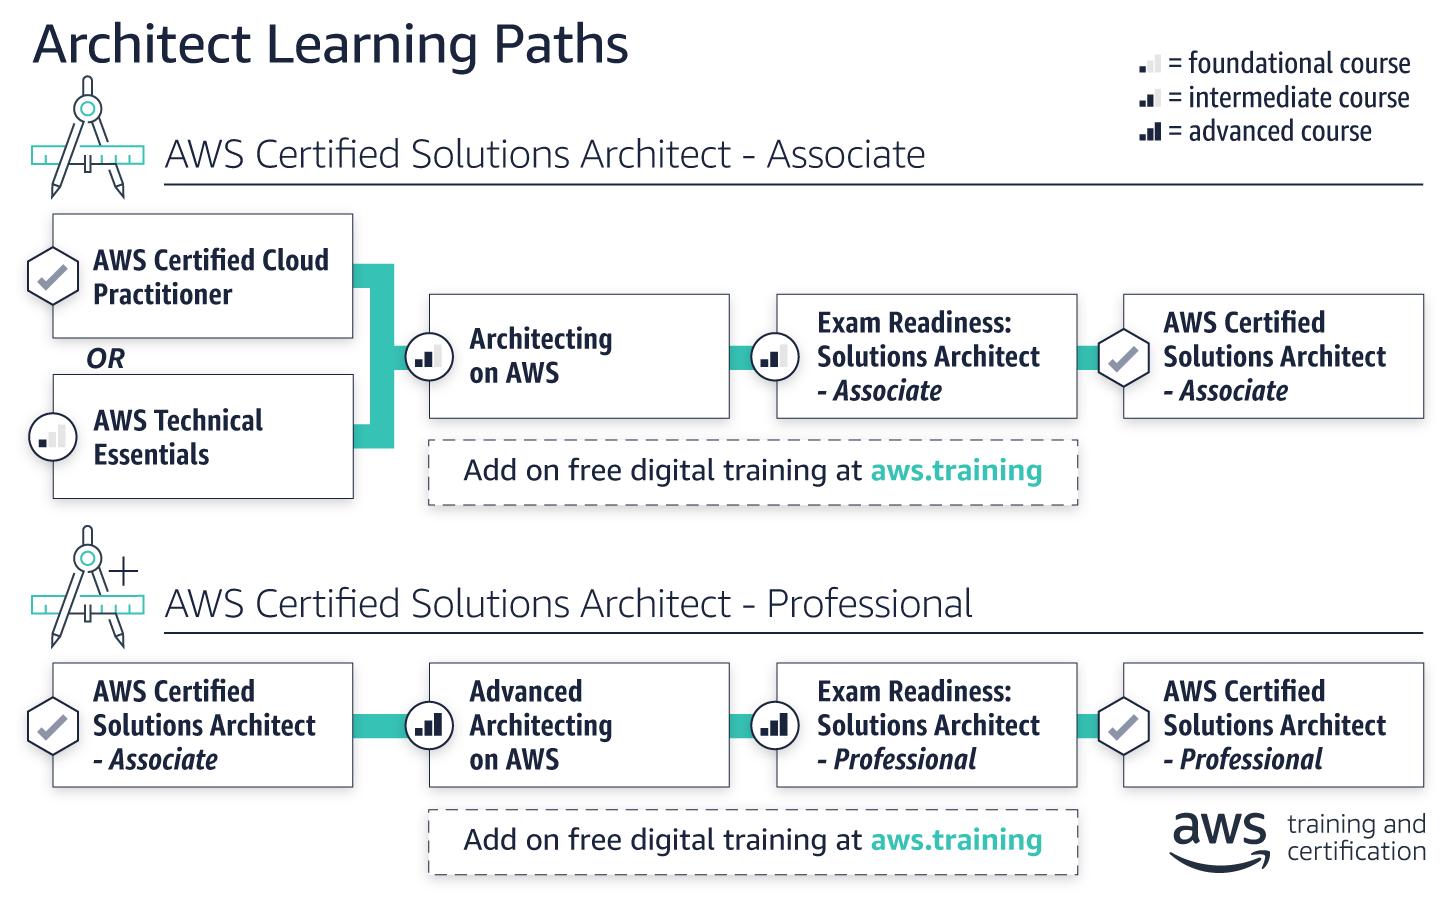 Certifications paths to become an AWS Certified Architect Associate or Professional